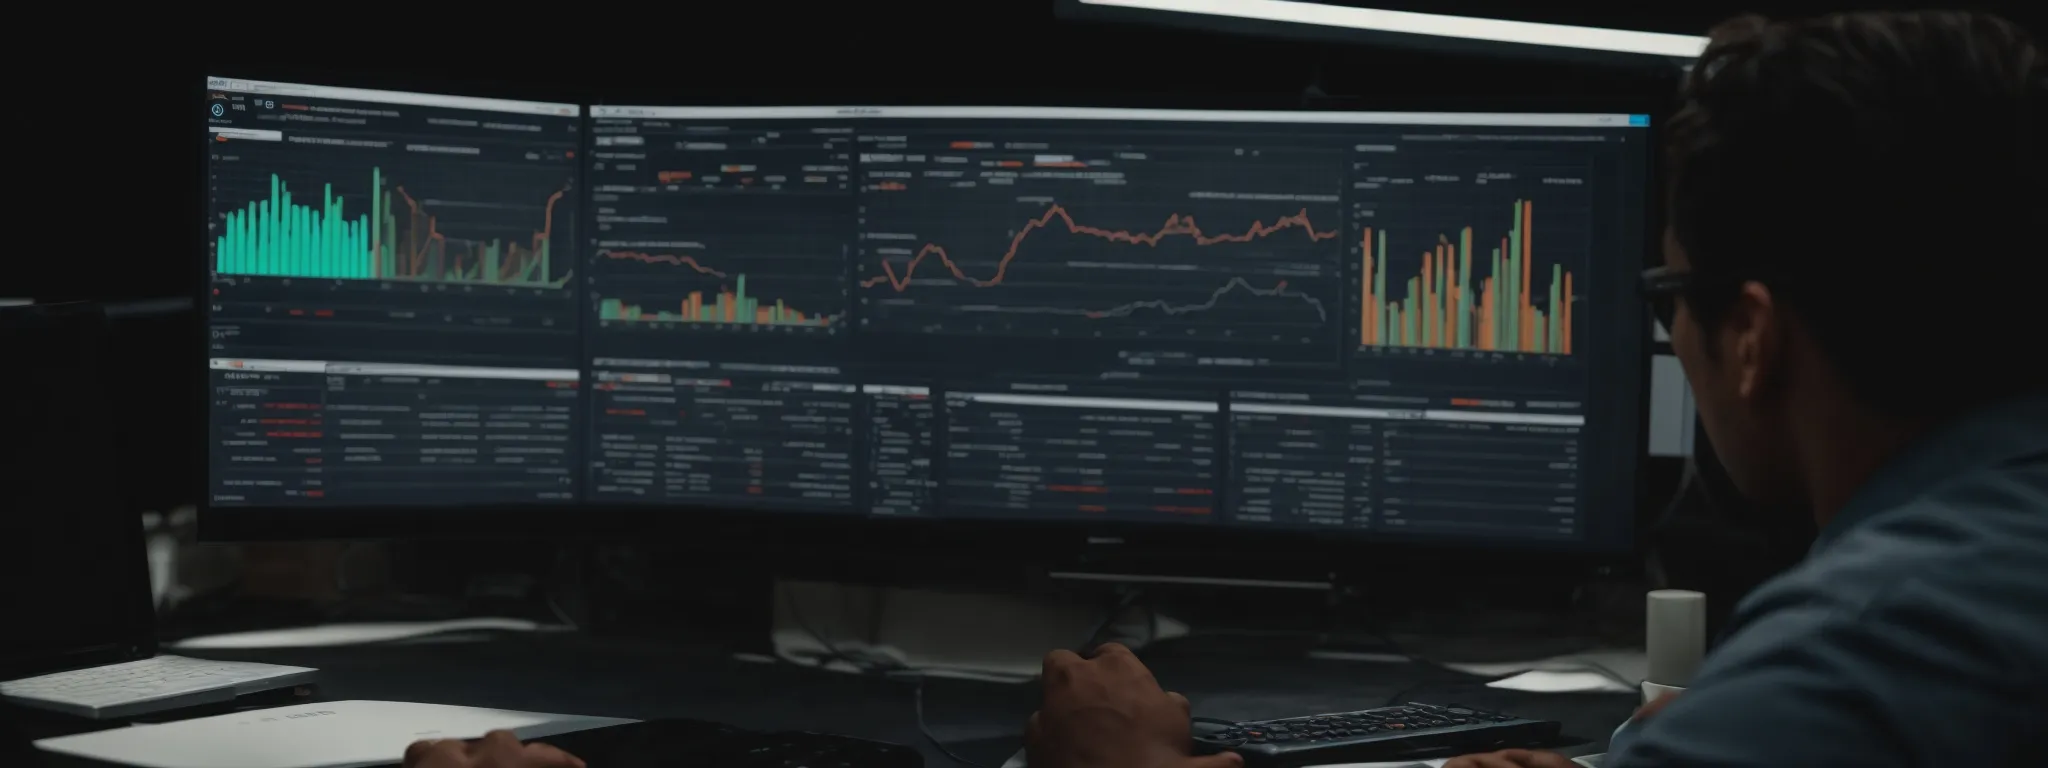 a professional viewing an advanced software dashboard filled with comprehensive charts and analytics on a computer screen.